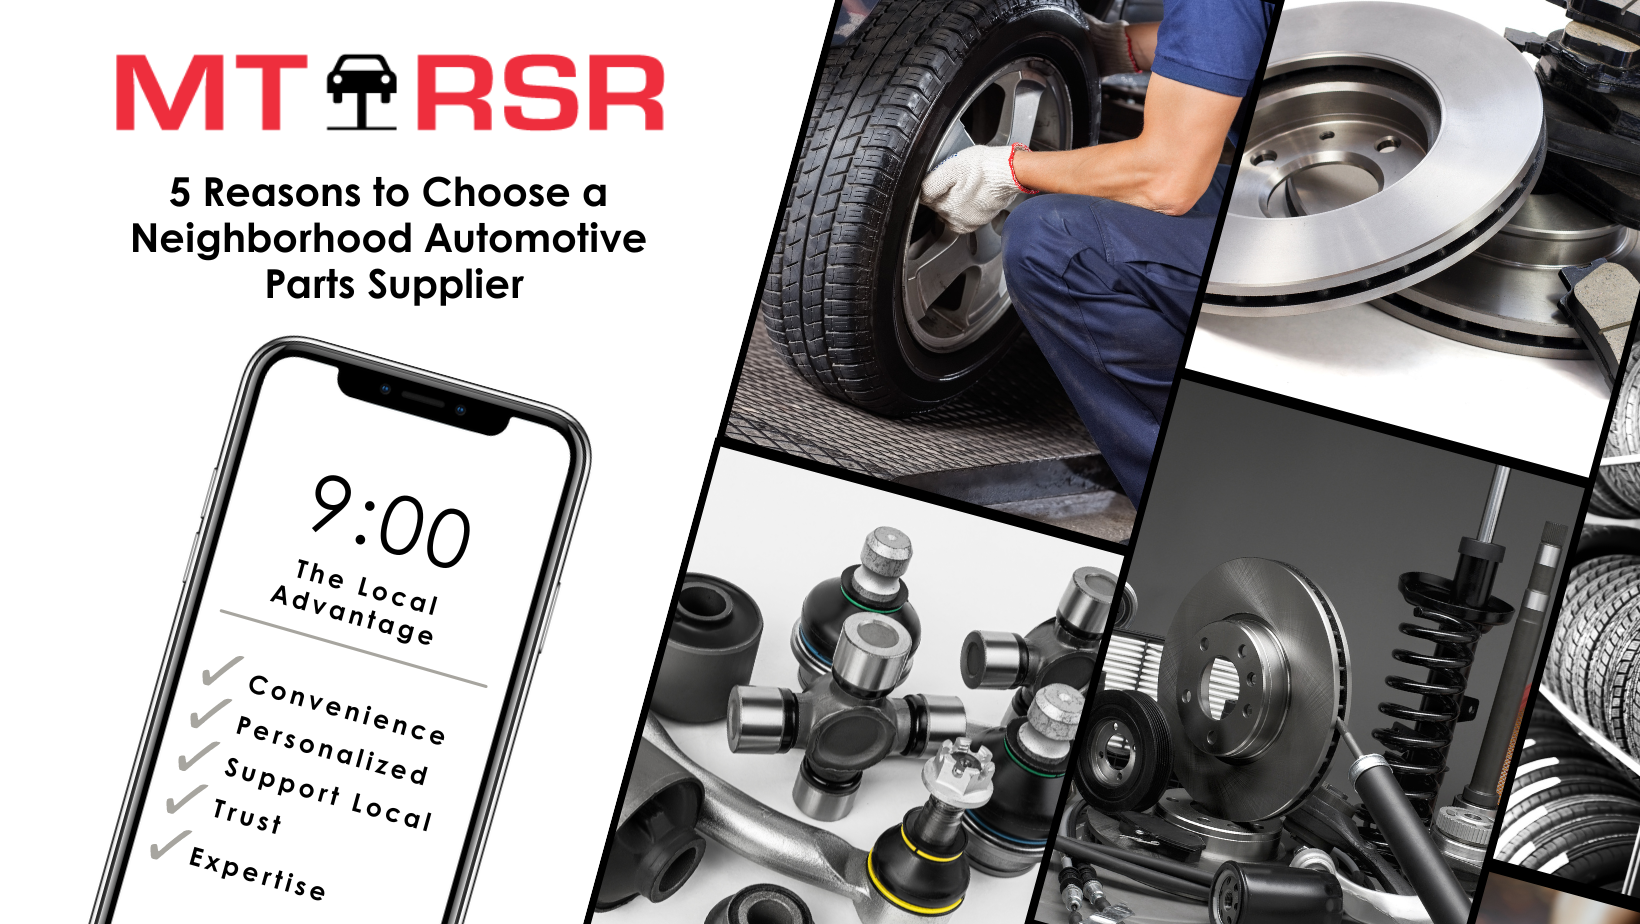 The Local Advantage: 5 Reasons to Choose a Neighborhood Automotive Machine Parts Supplier